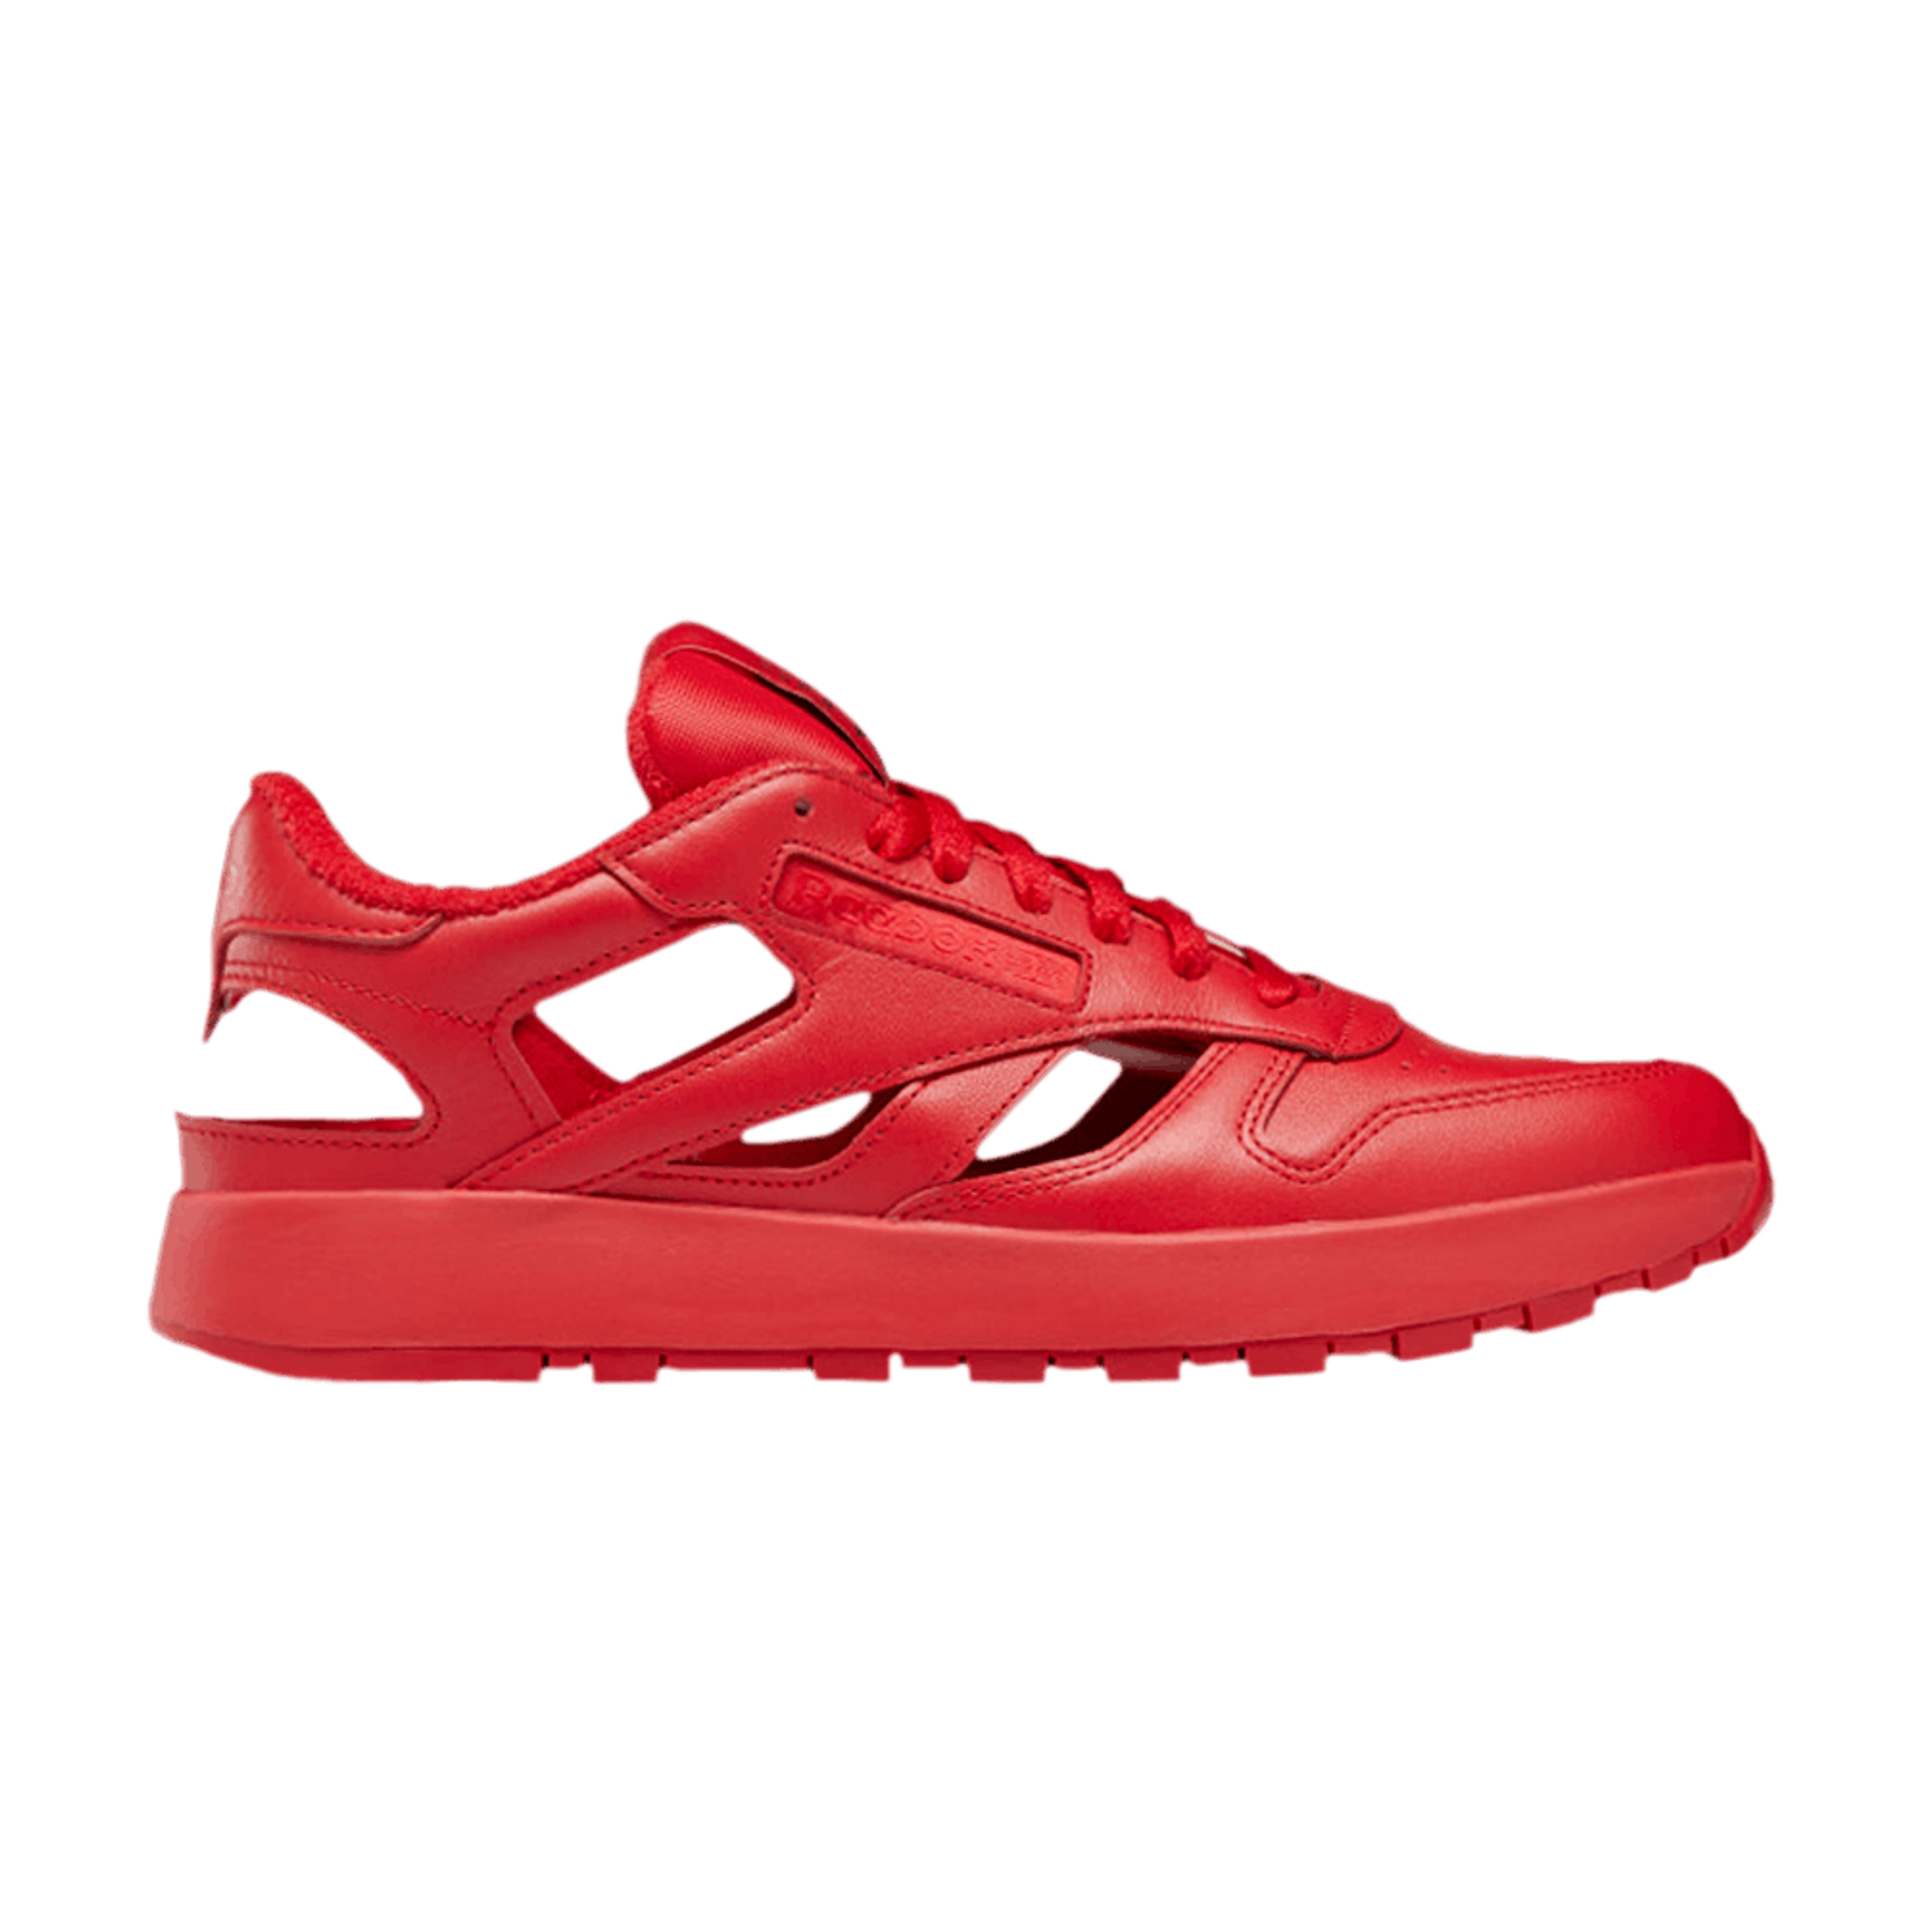 Maison Margiela x Classic Leather DQ 'Vector Red'